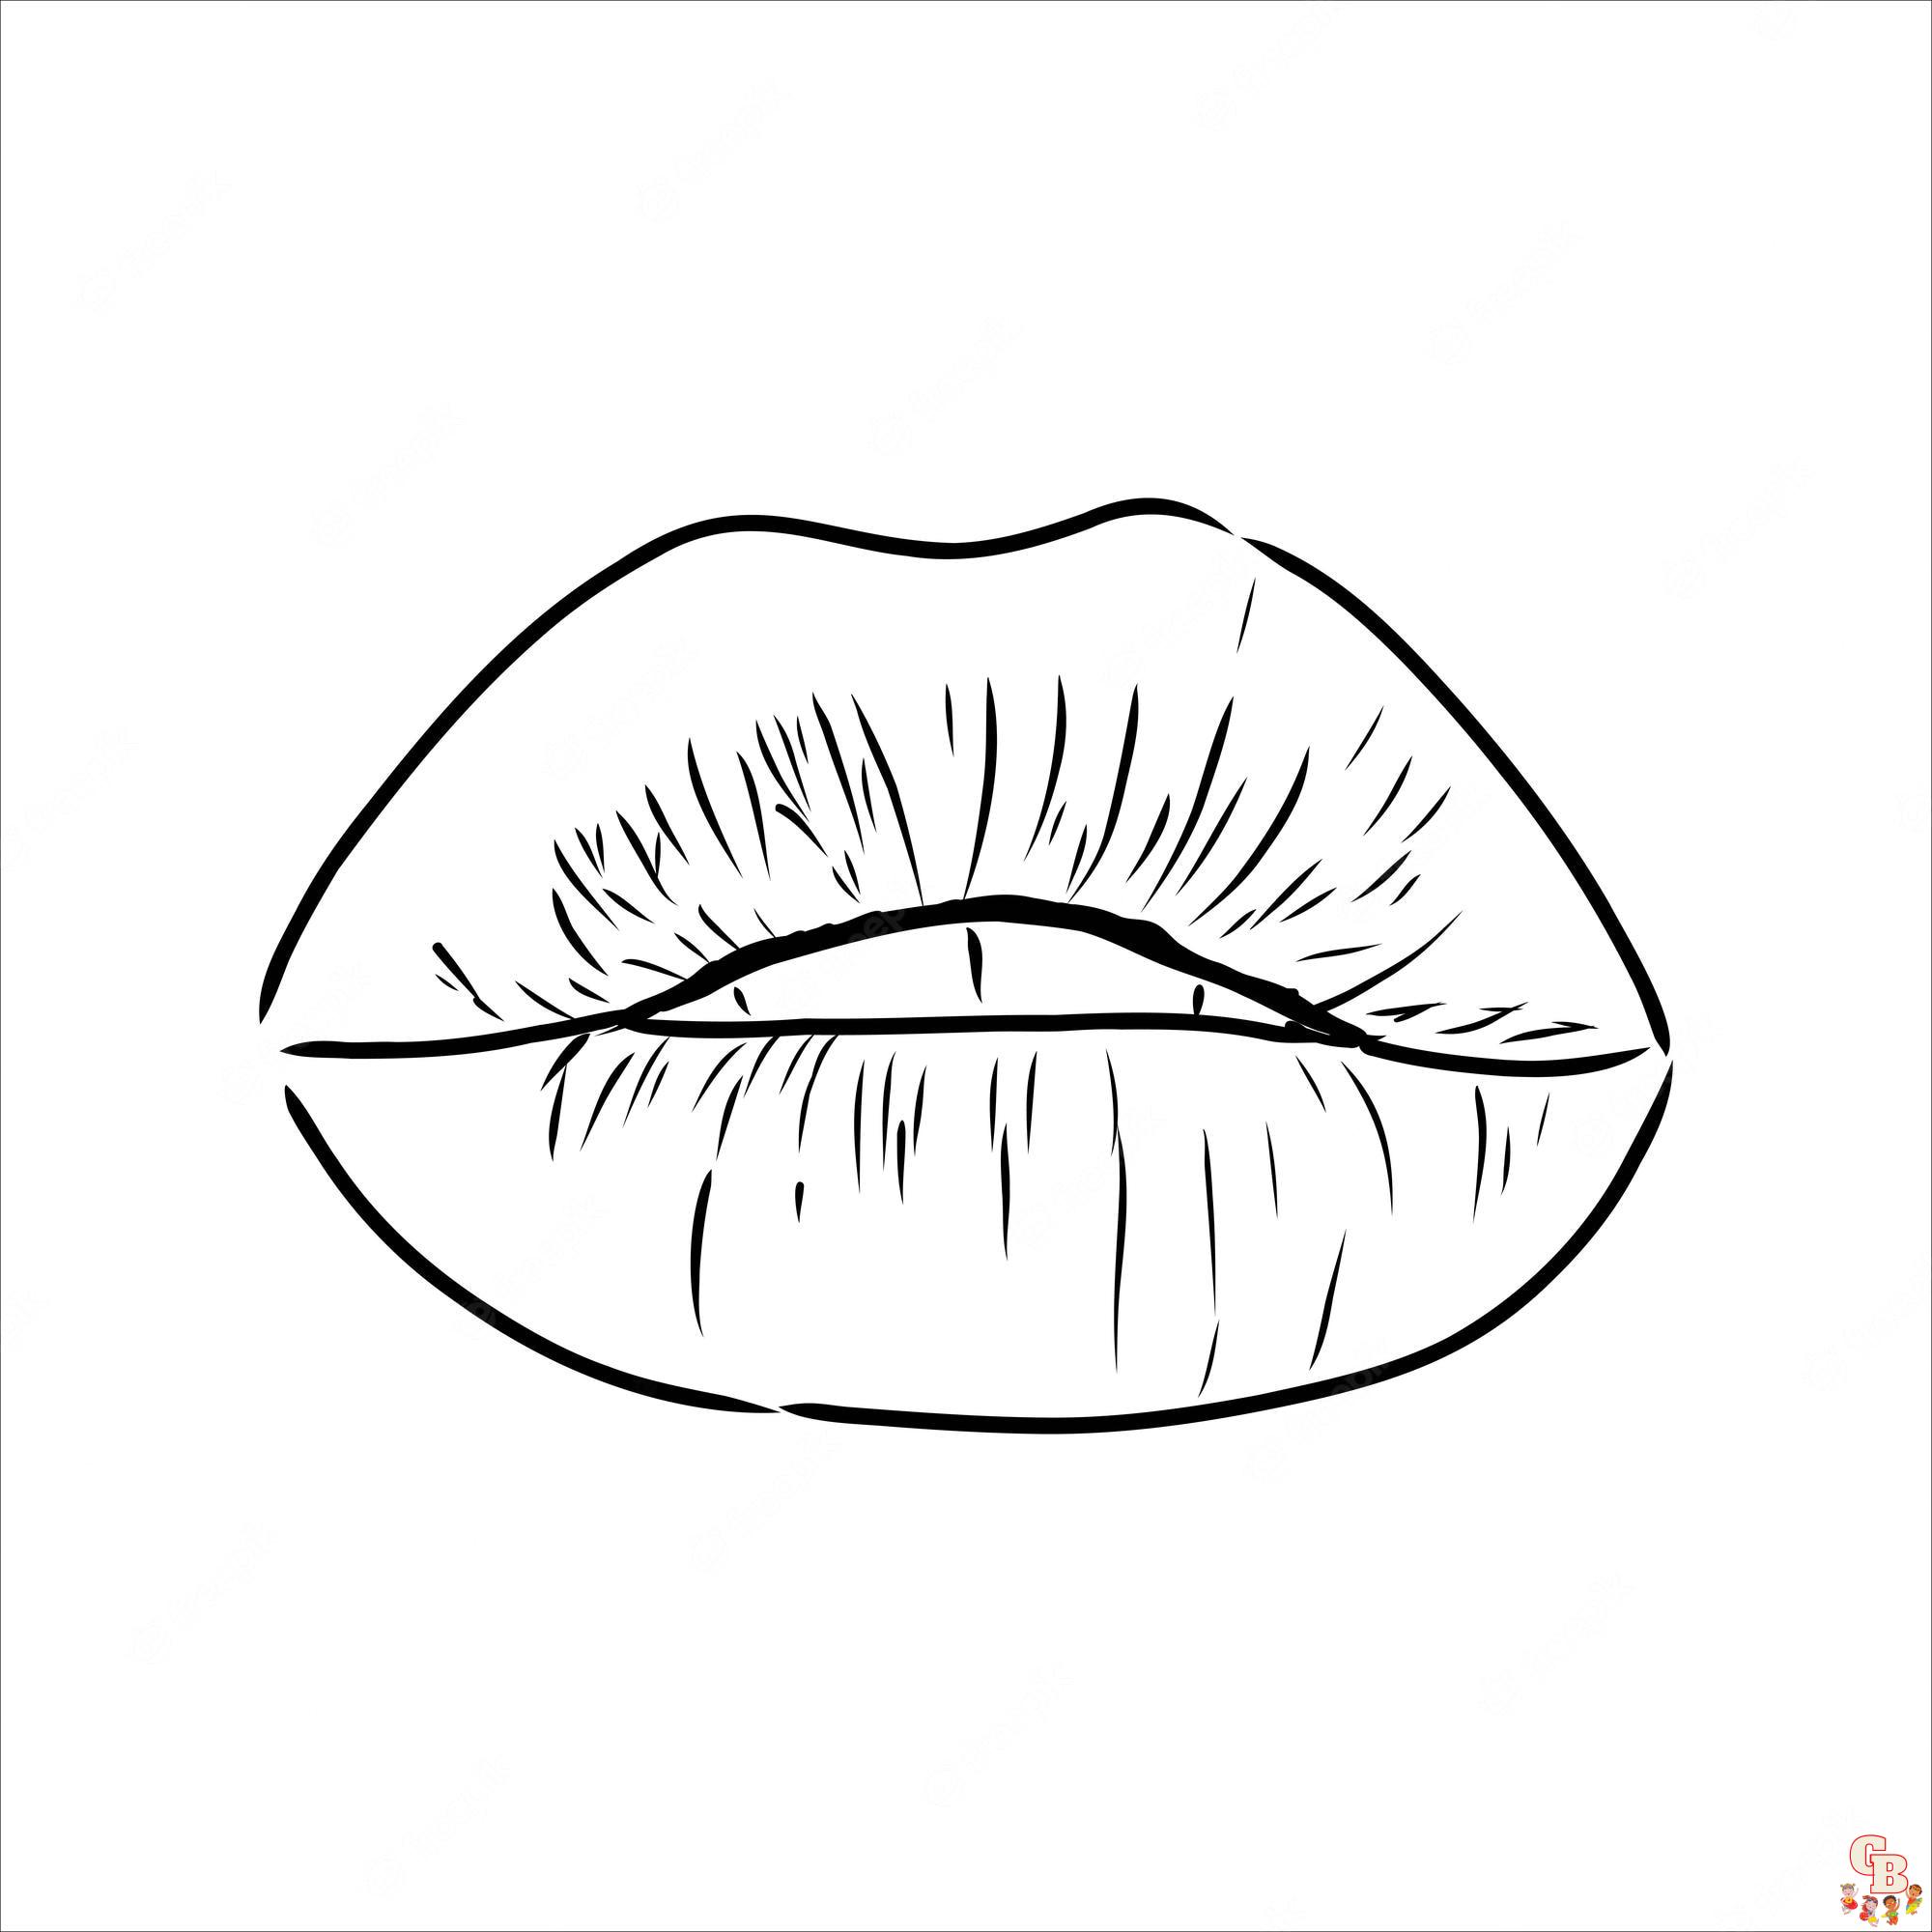 Lips coloring pages free printable pages and easy diy activities